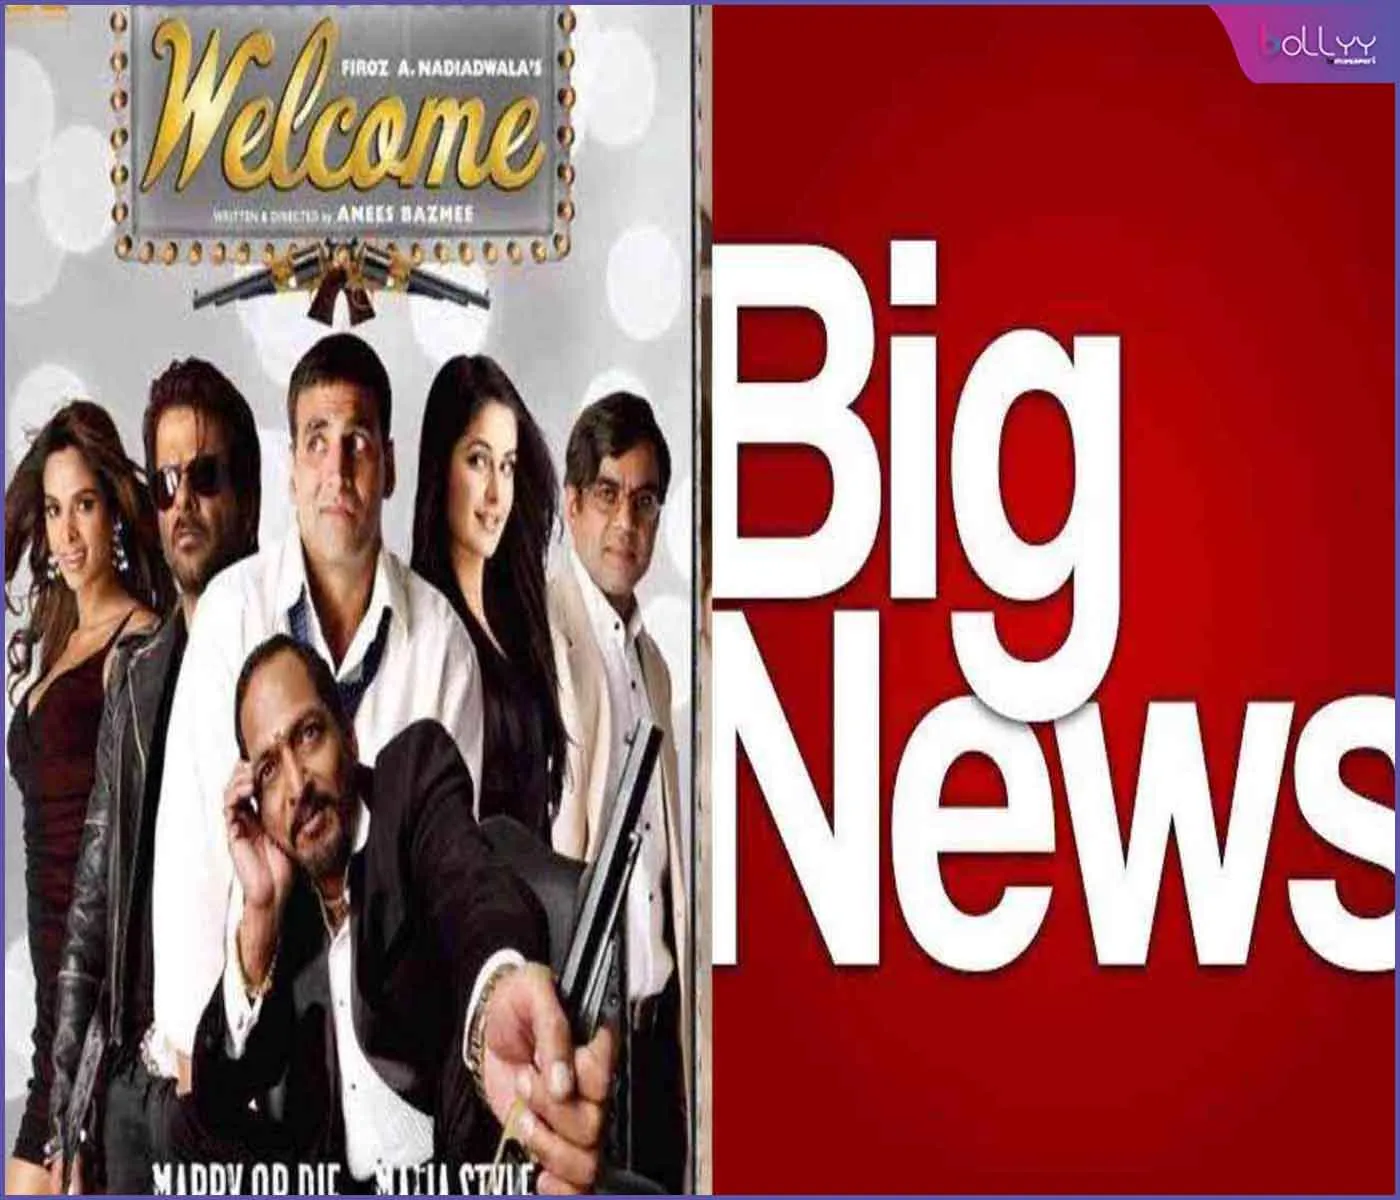 Welcome 3 release date